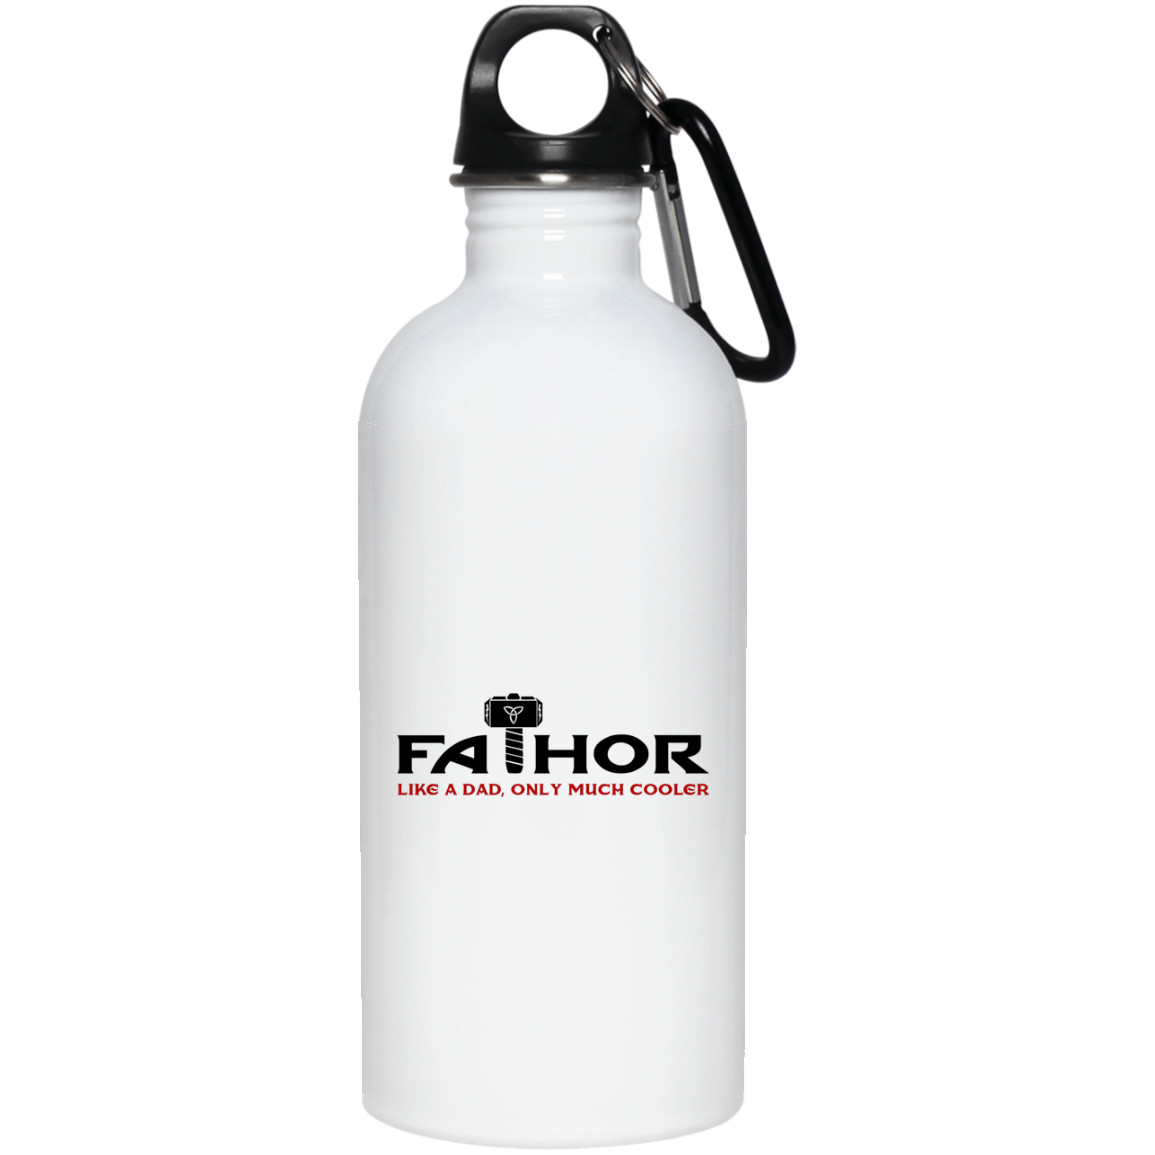 Fathor Like a Dad Only Much Cooler - 20 oz. Stainless Steel Water Bottle